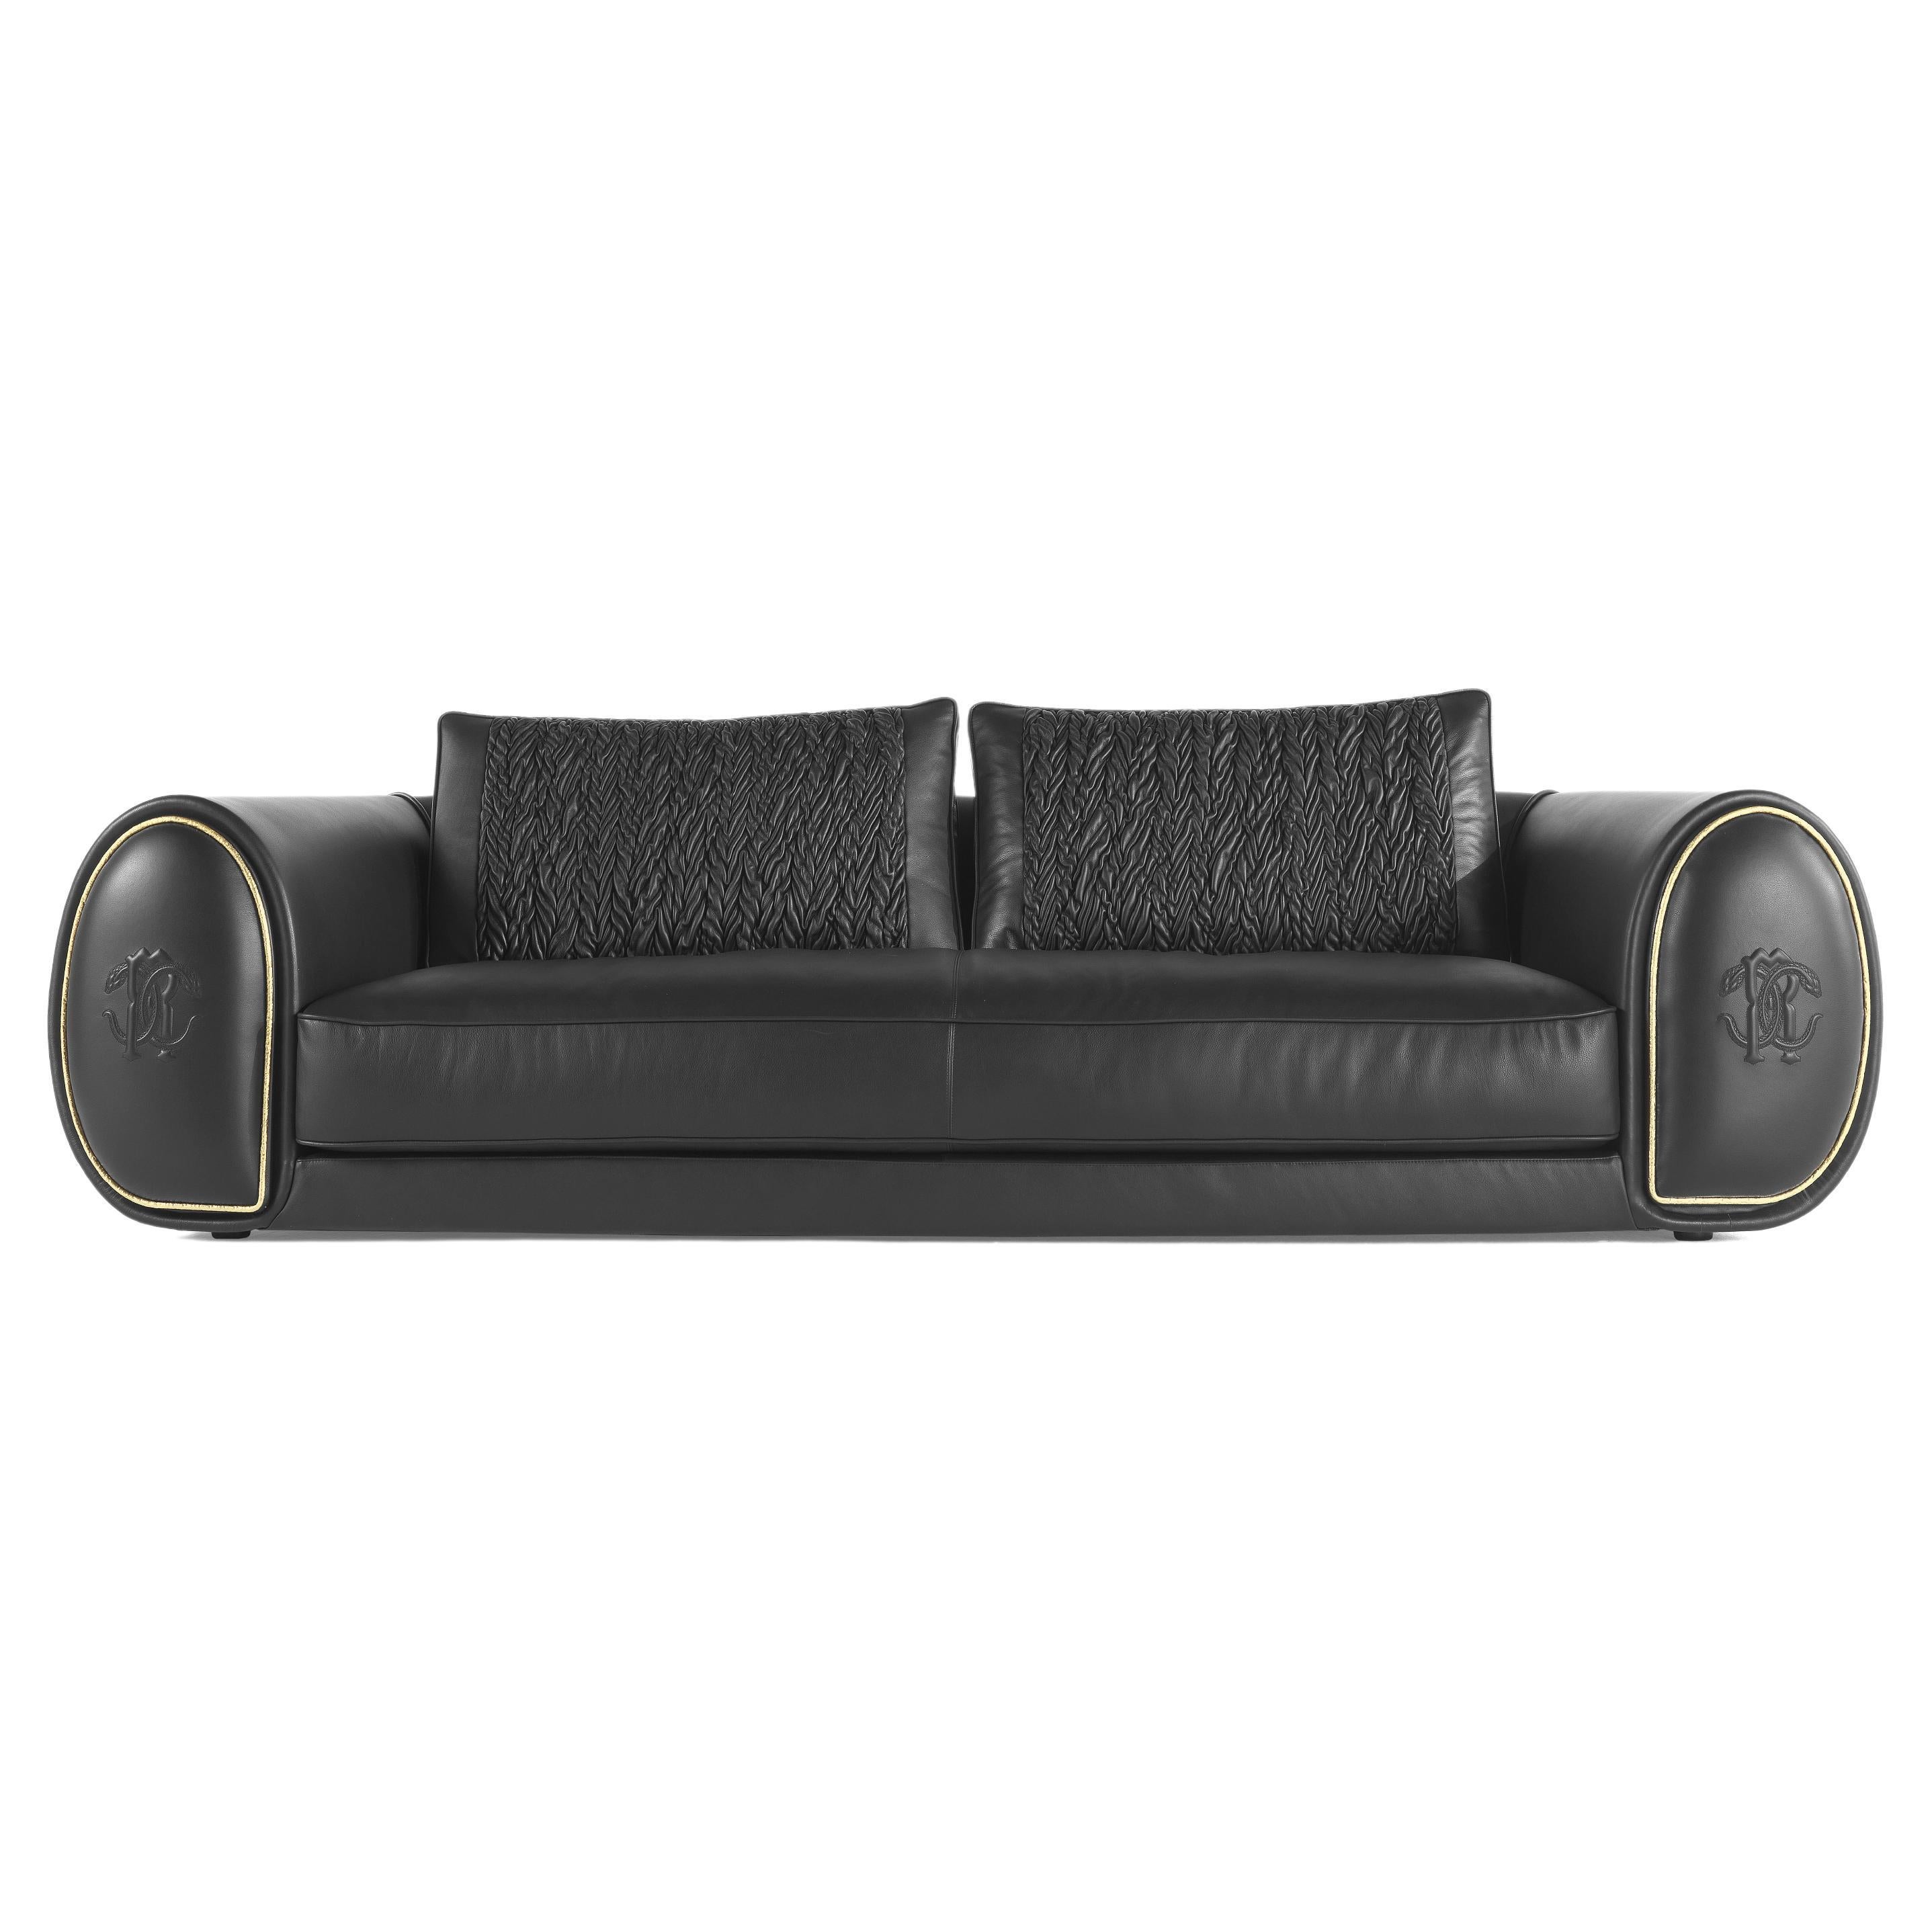 21st Century Bold.2 Sofa in Black Leather by Roberto Cavalli Home Interiors